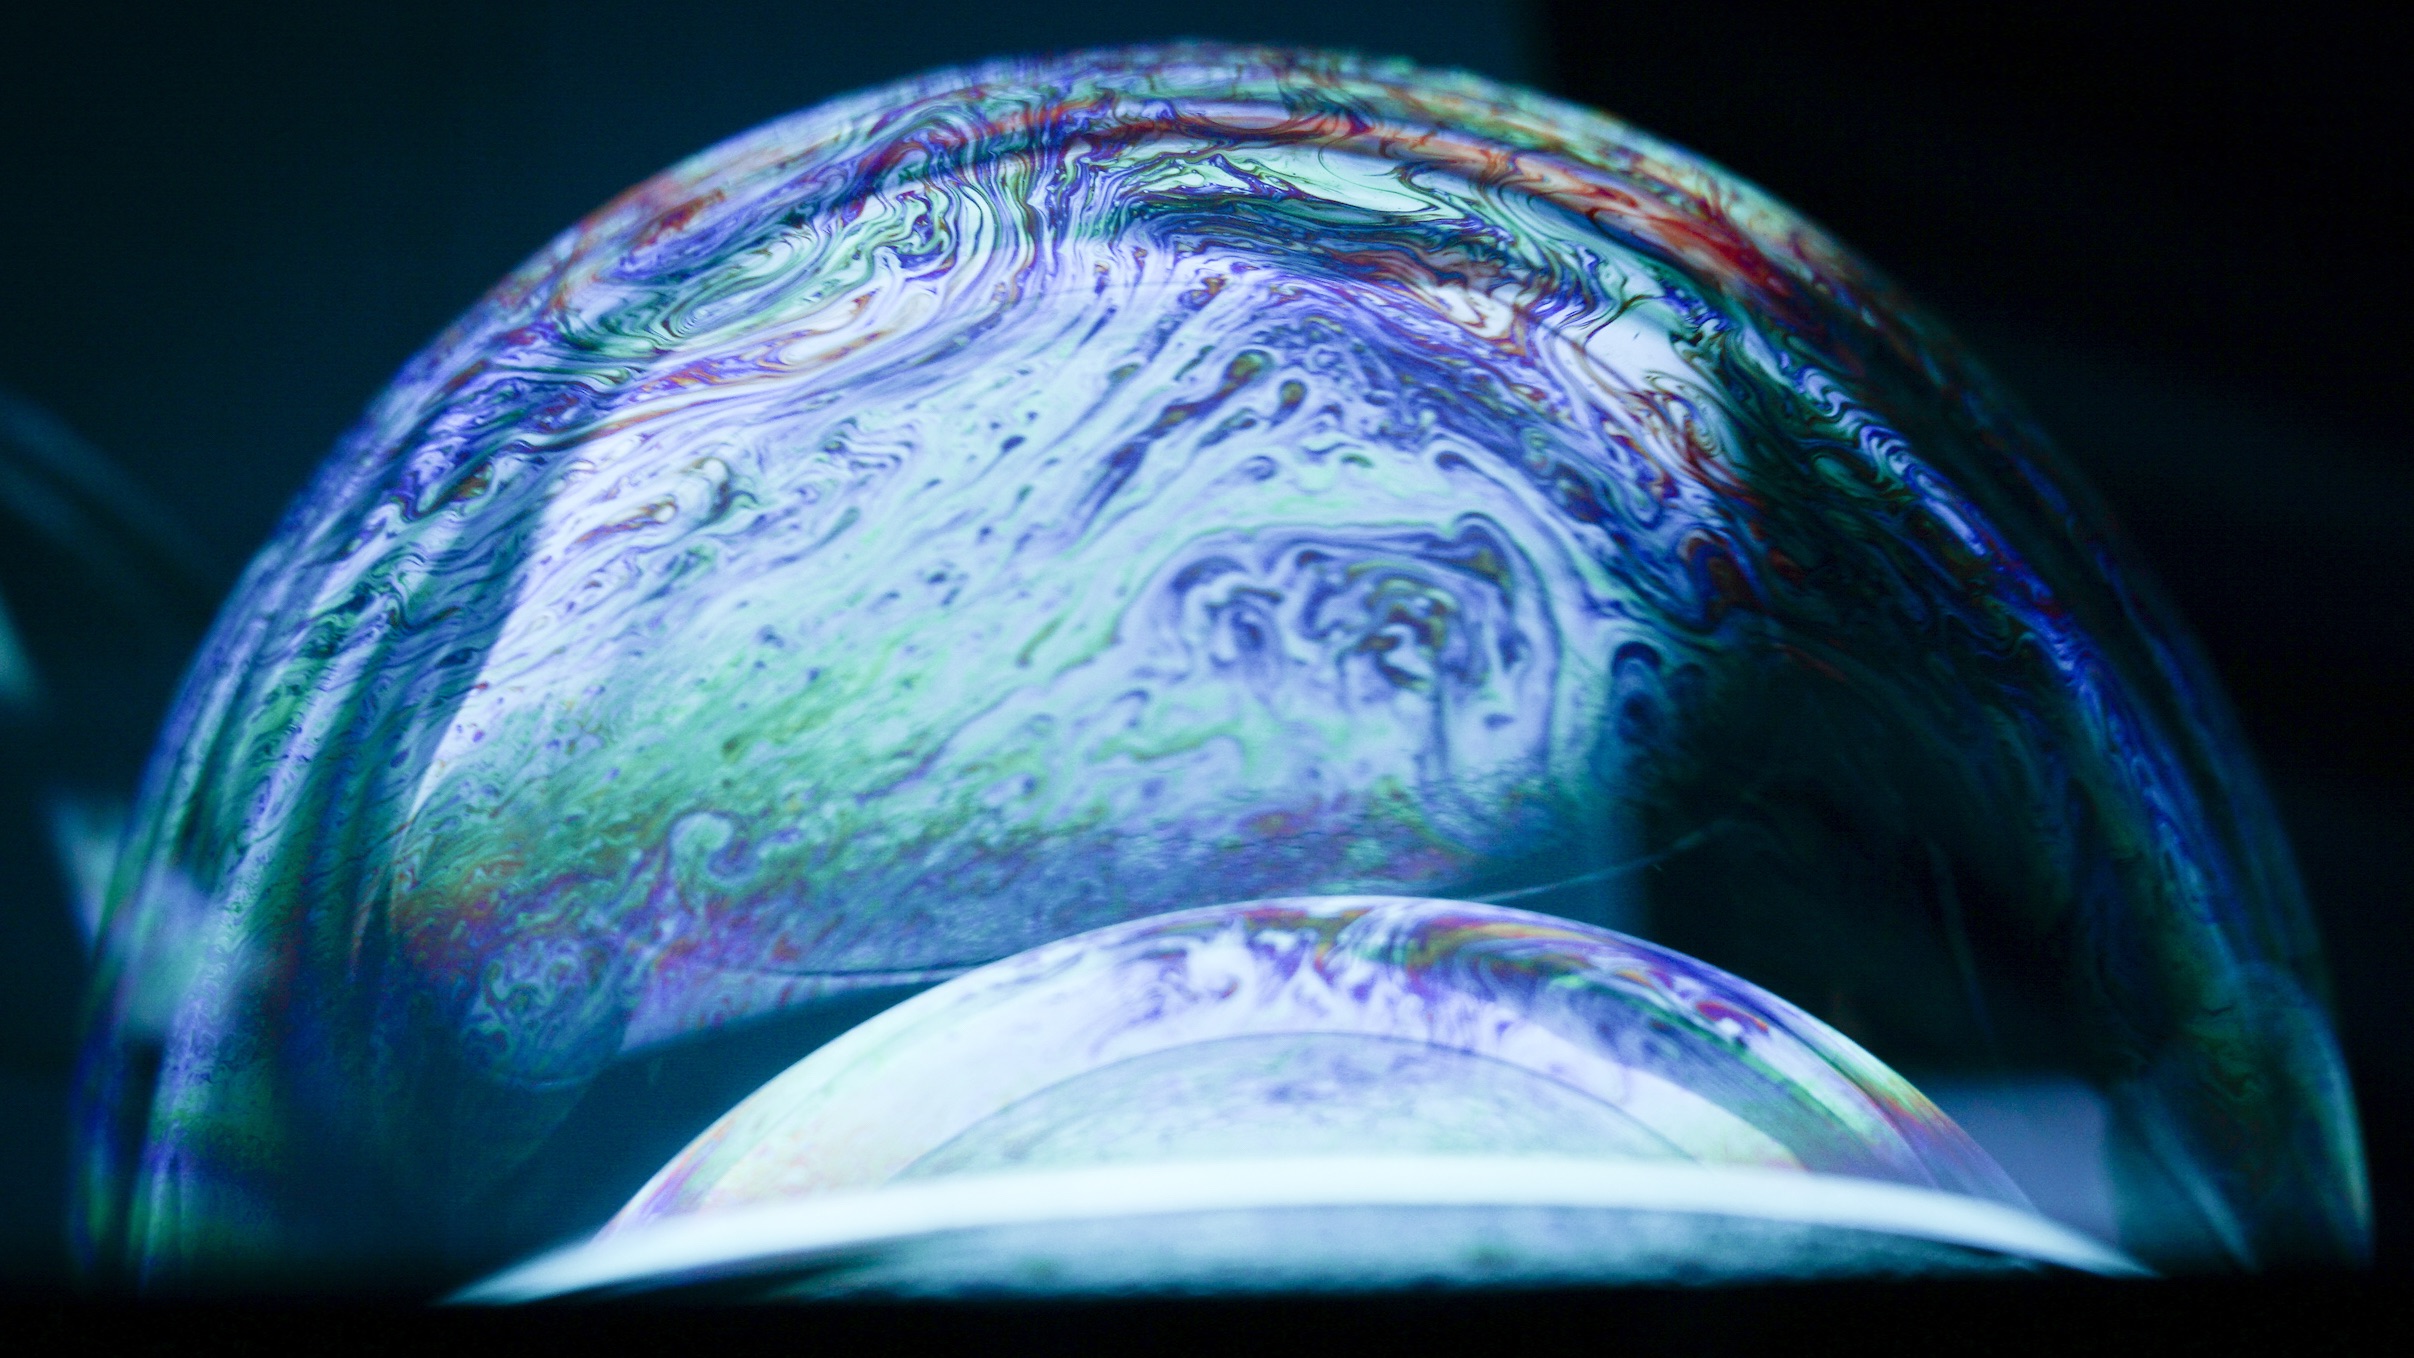 Swirly Dome by Deltafire, photography competition